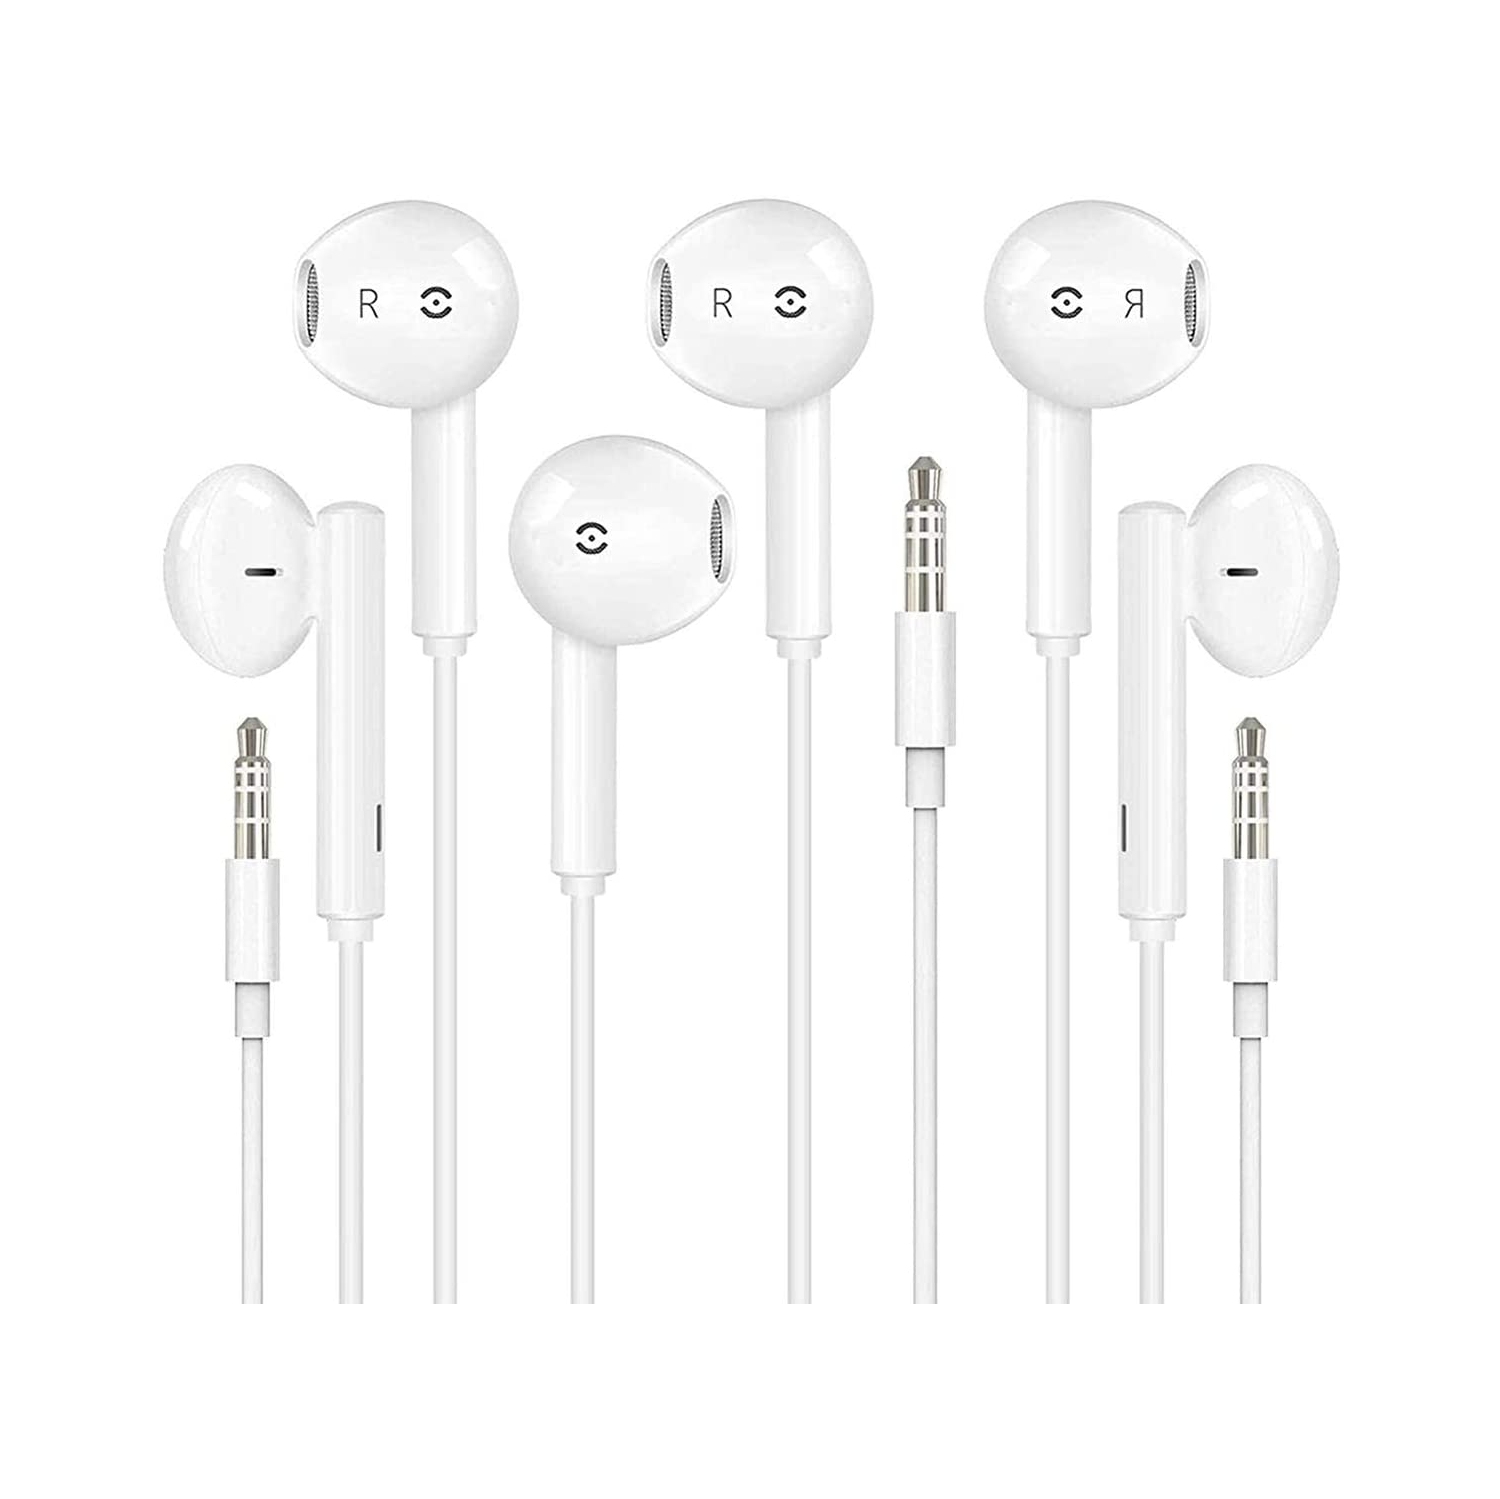 CABLESHARK for Apple Compatible Earbuds/Headphones/Earphones with 3.5mm Wired in Ear Headphone Plug(Built-in Microphone & Volume Control) Compatible with iPhone,iPad,Compter,MP3/4,Android etc - 3 Pack